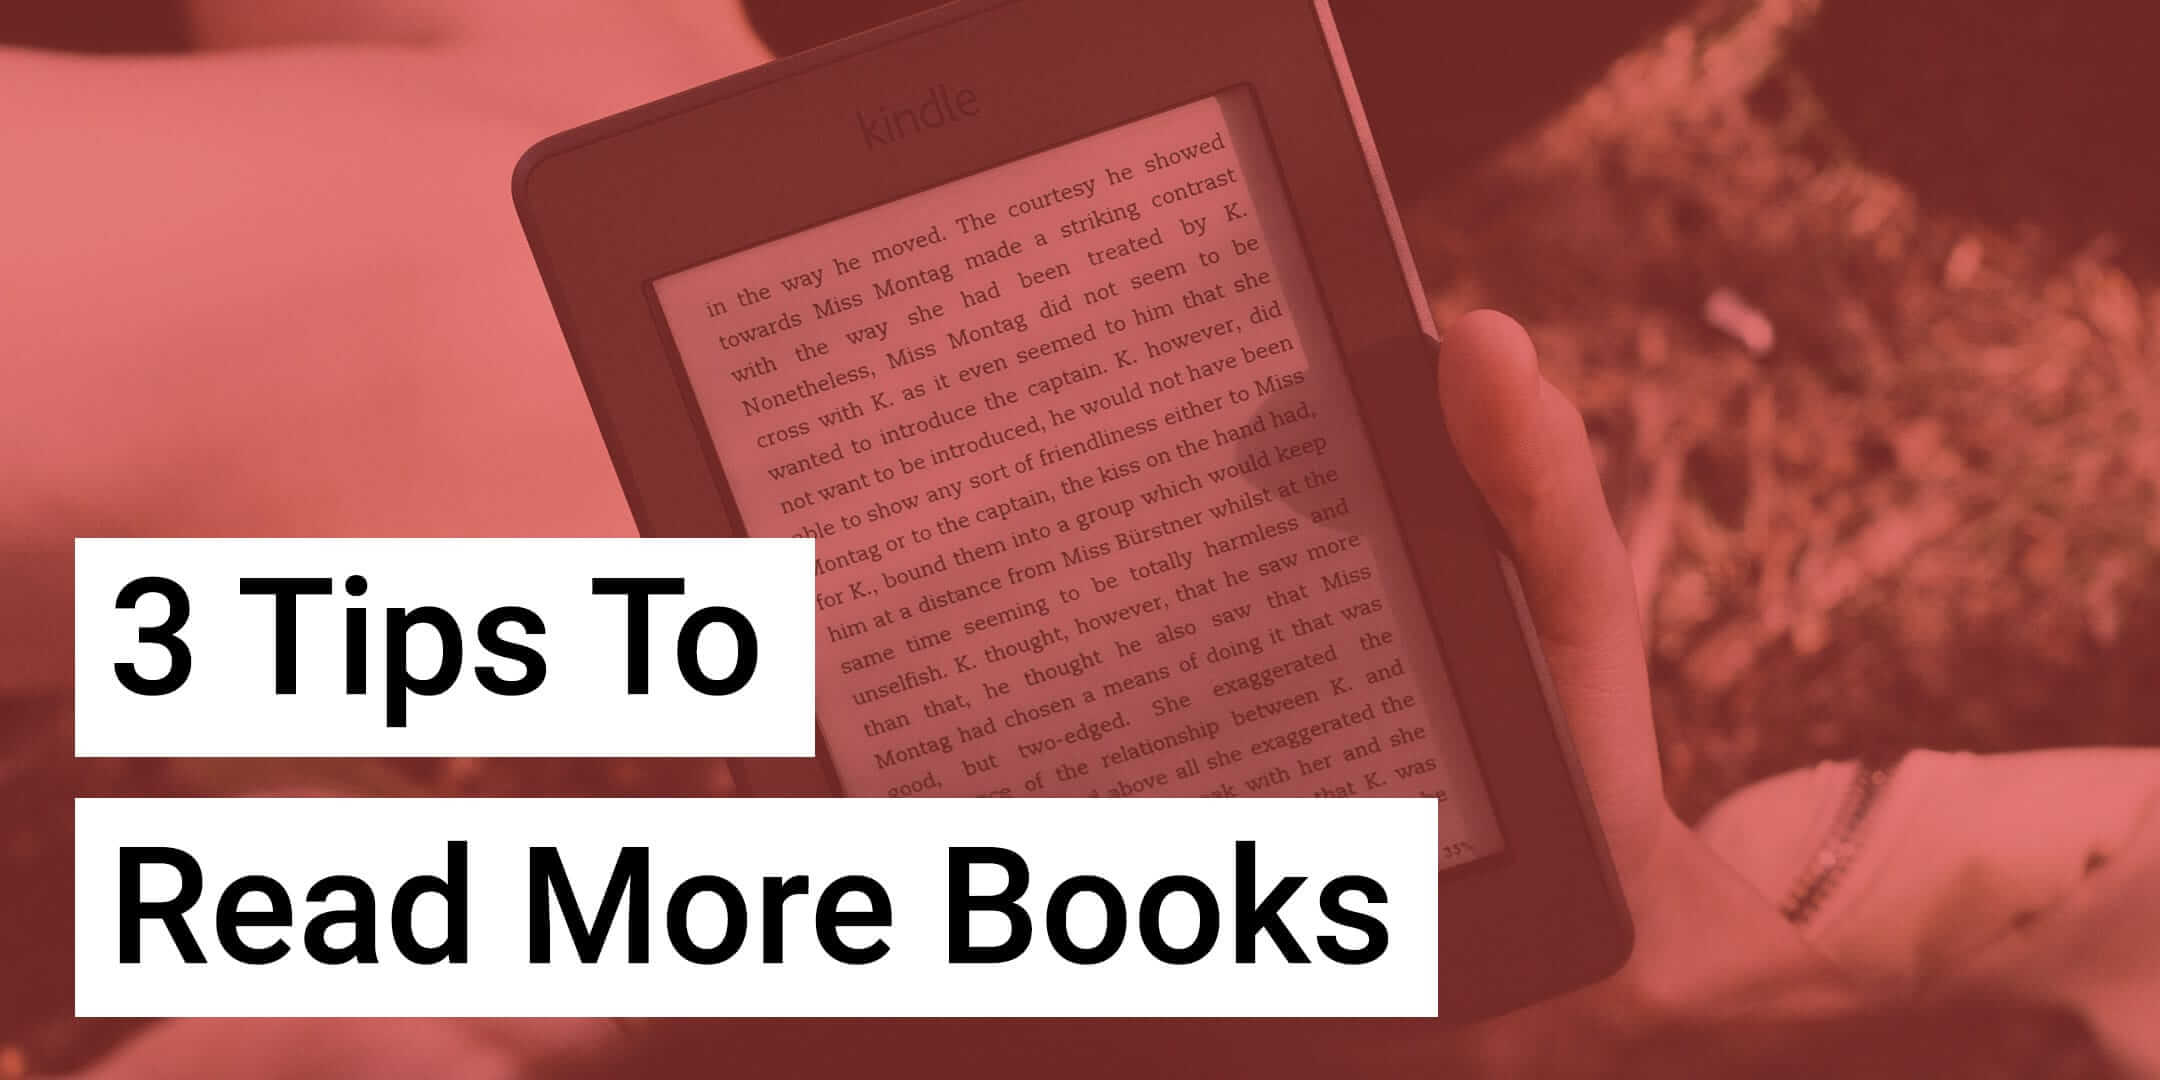 3 Tips To Read More Books | Jason Yingling